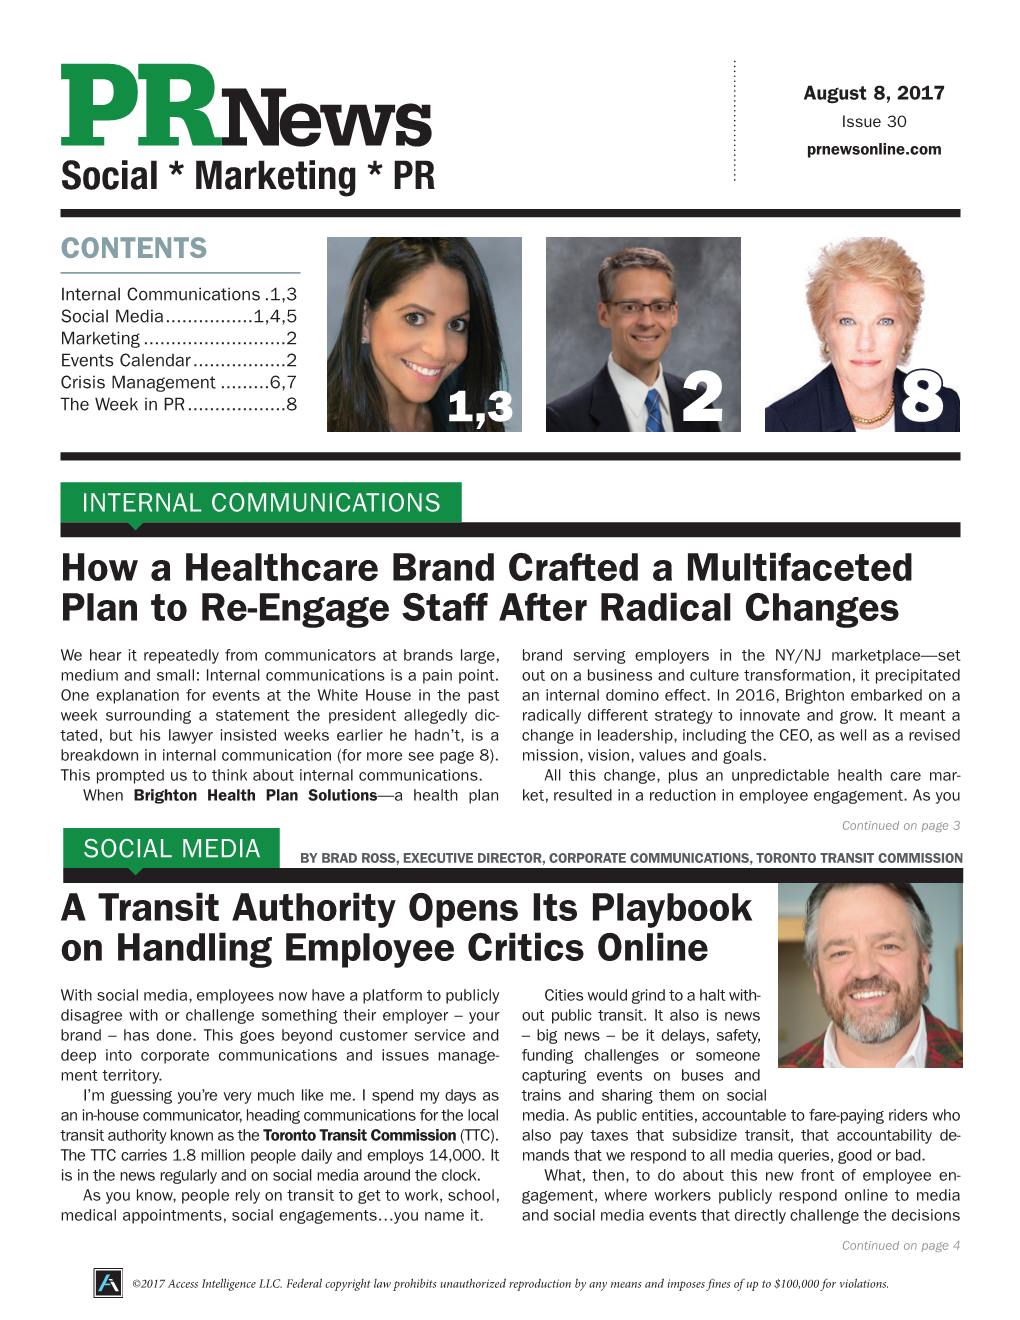 How a Healthcare Brand Crafted a Multifaceted Plan to Re-Engage Staff After Radical Changes